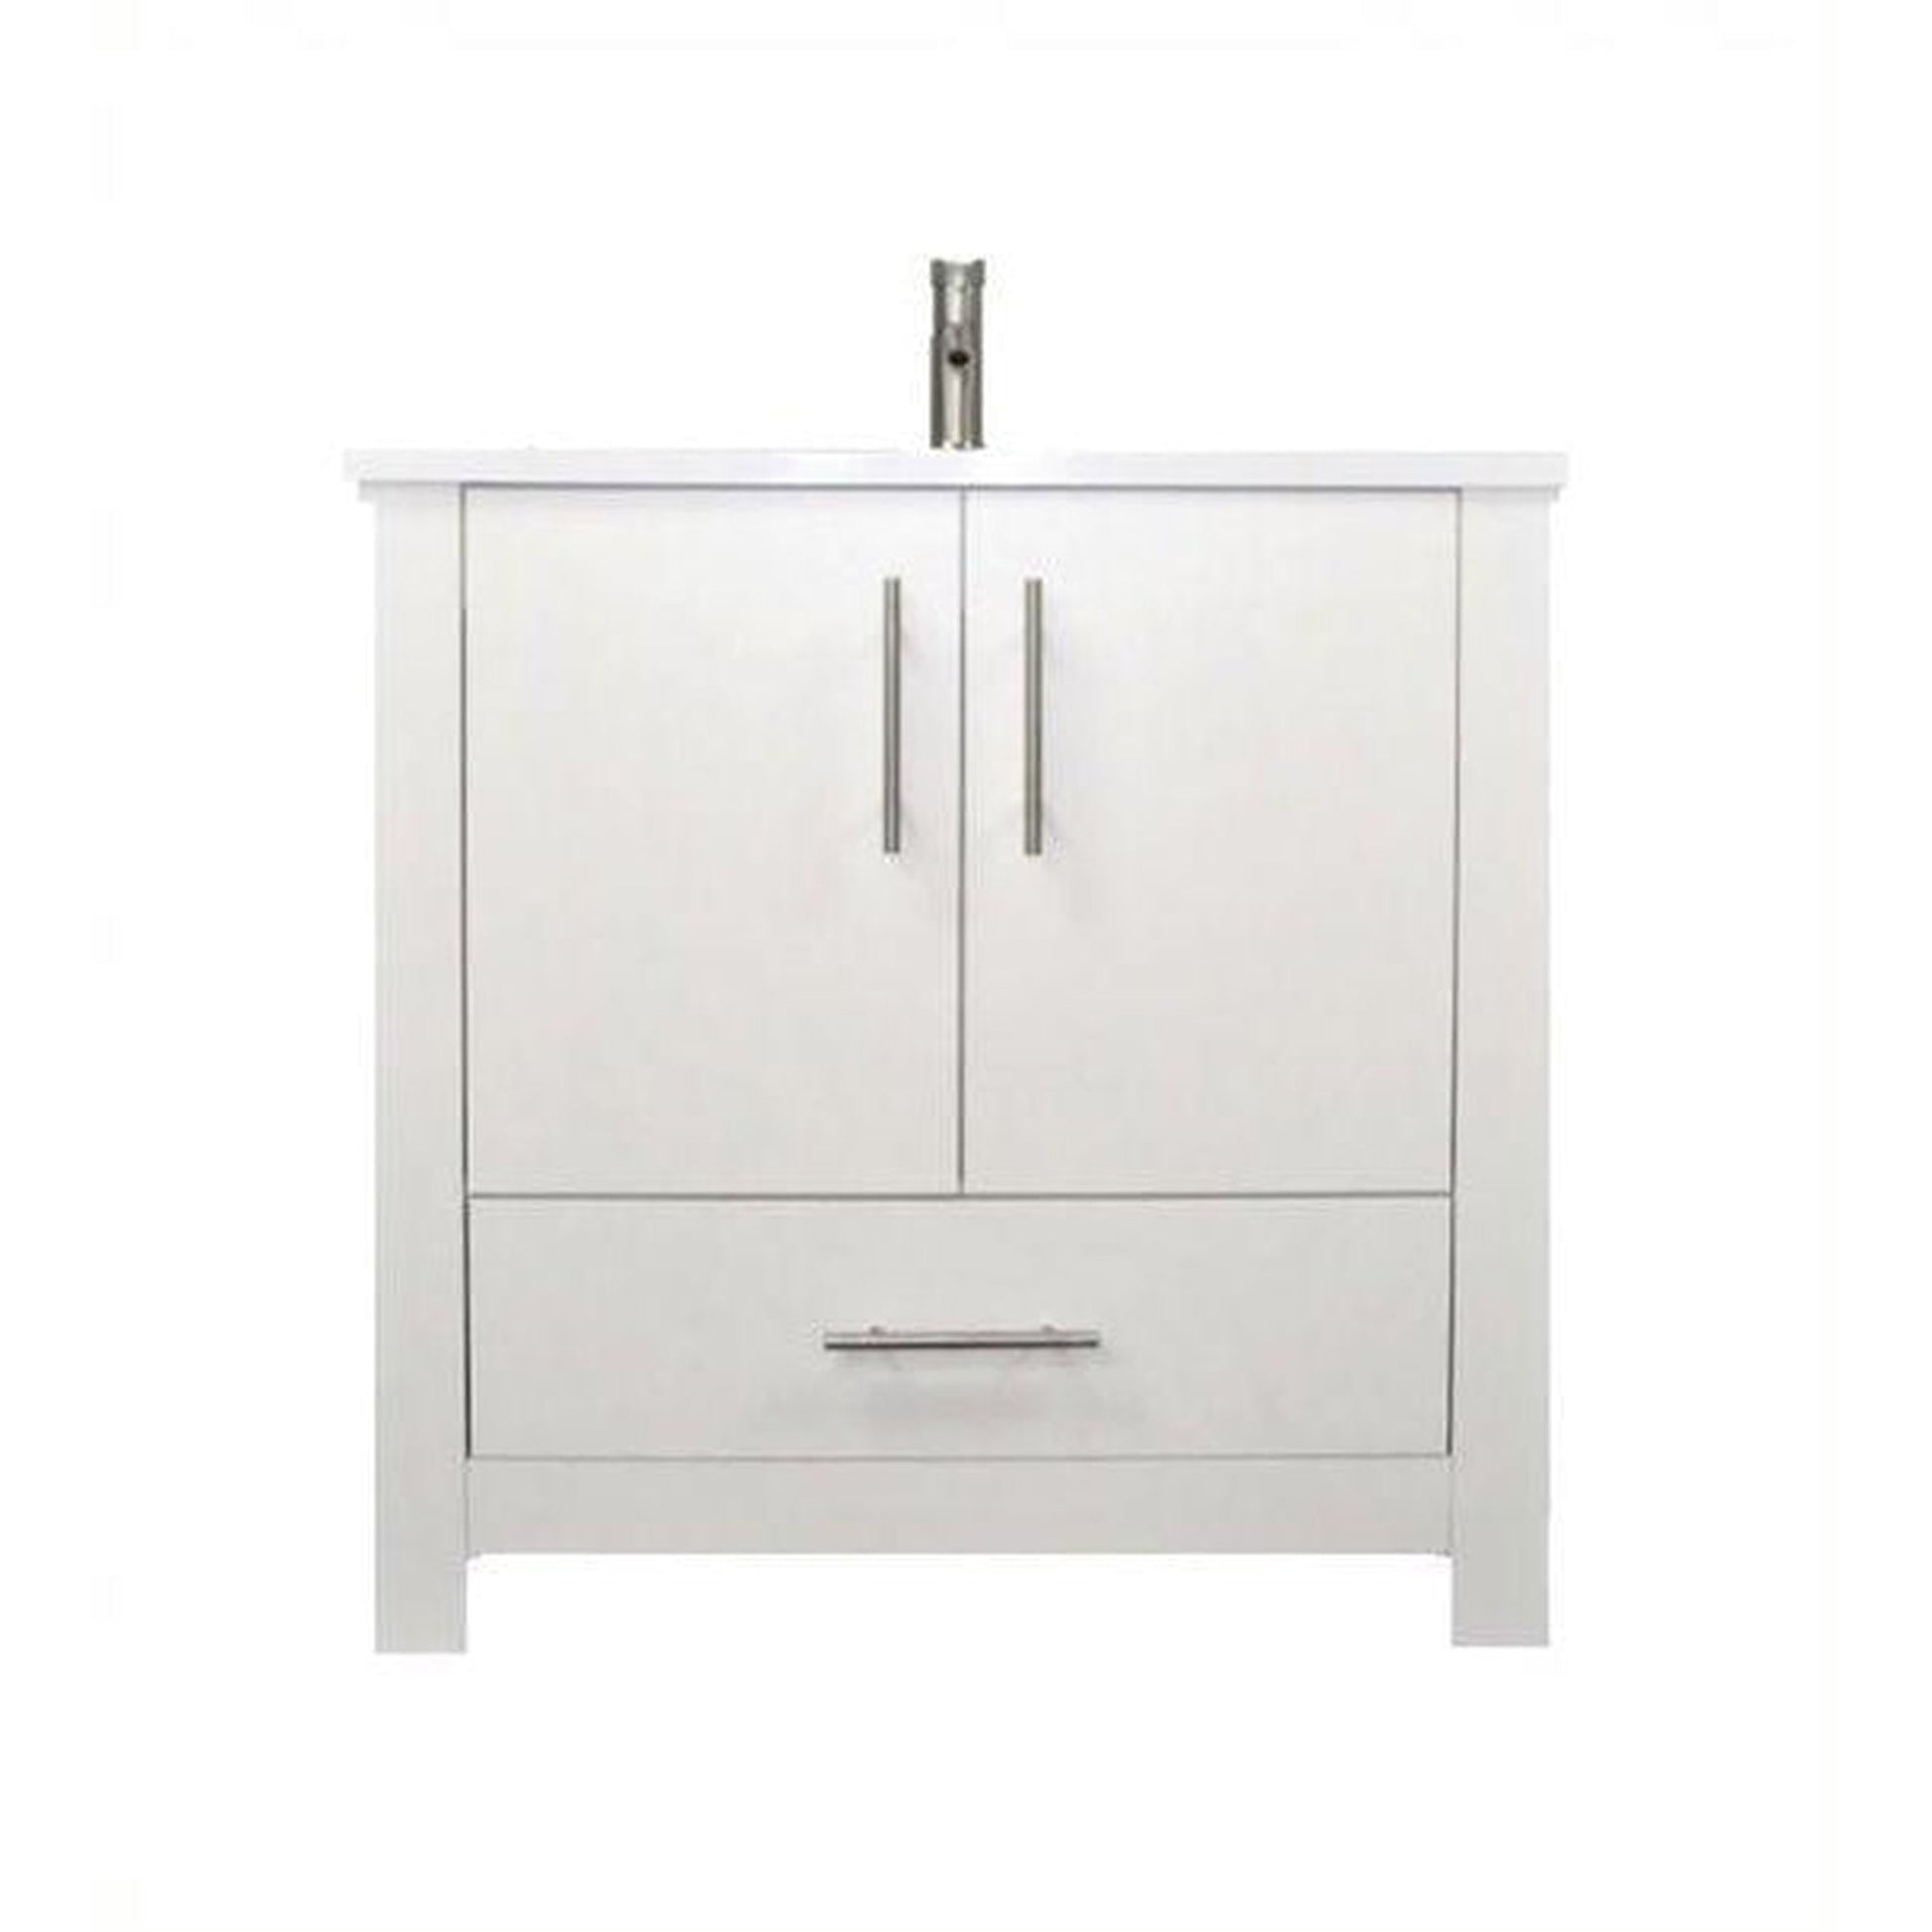 Volpa USA Boston 36" x 20" White Modern Freestanding Bathroom Vanity With Acrylic Top, Integrated Acrylic Sink And Brushed Nickel Handles